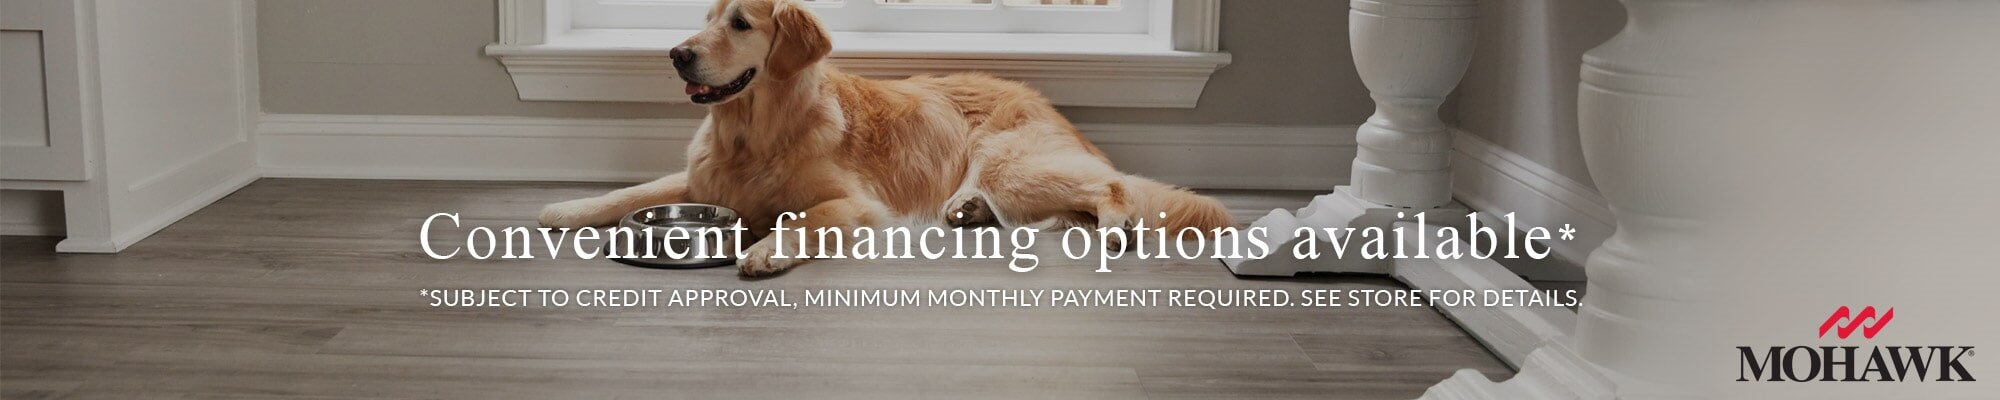 Financing options in WILLOW GROVE, PA from Easton Flooring, Mohawk Partner